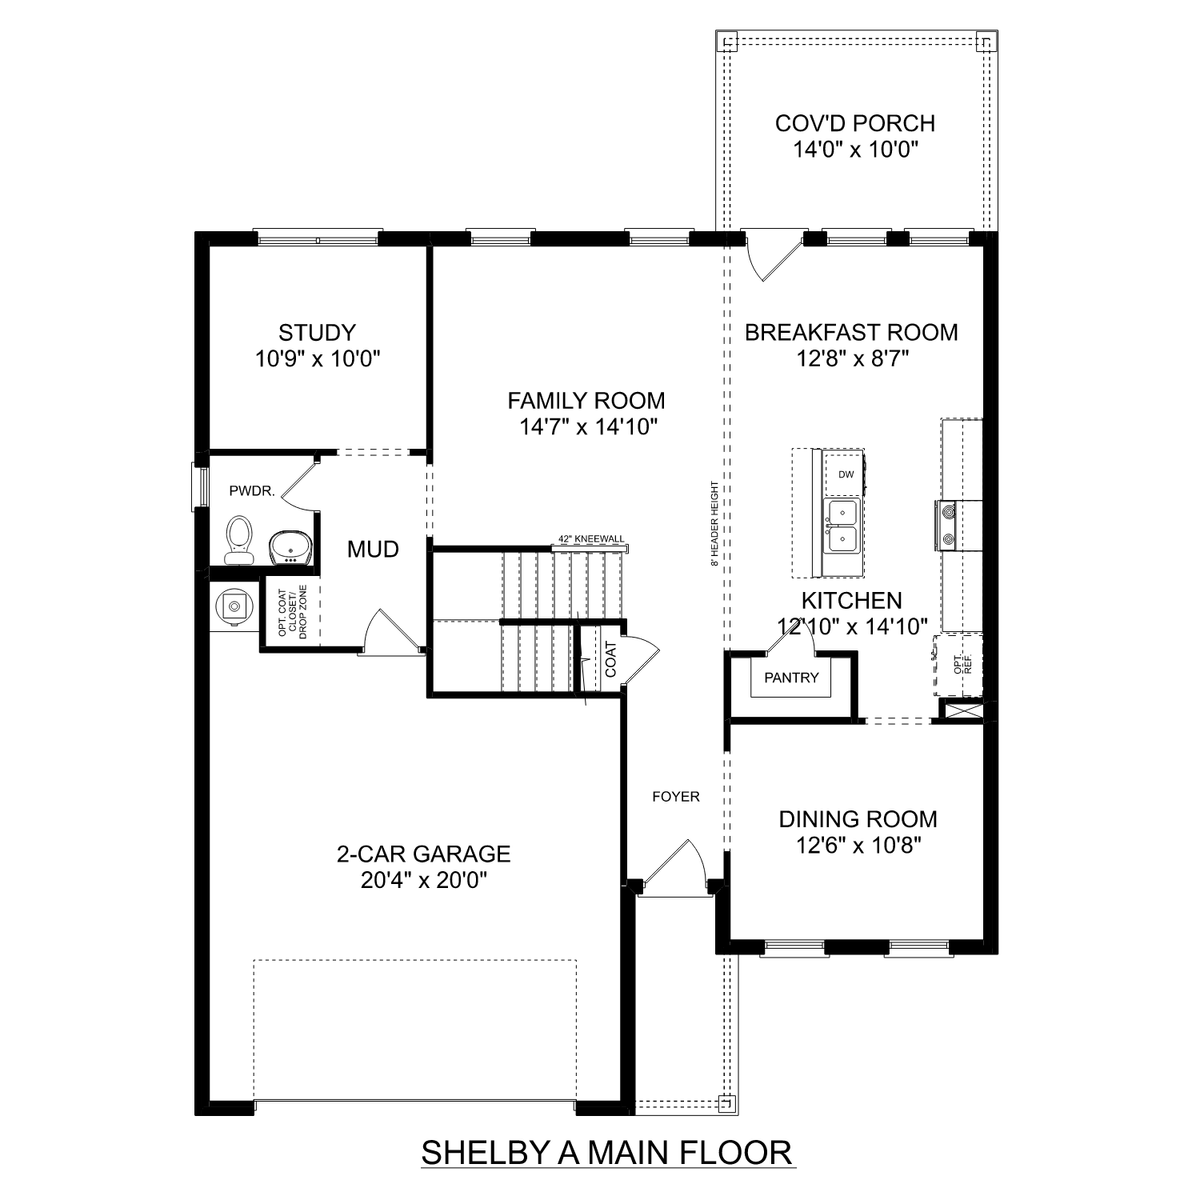 1 - The Shelby A buildable floor plan layout in Davidson Homes' Monteagle Cove community.